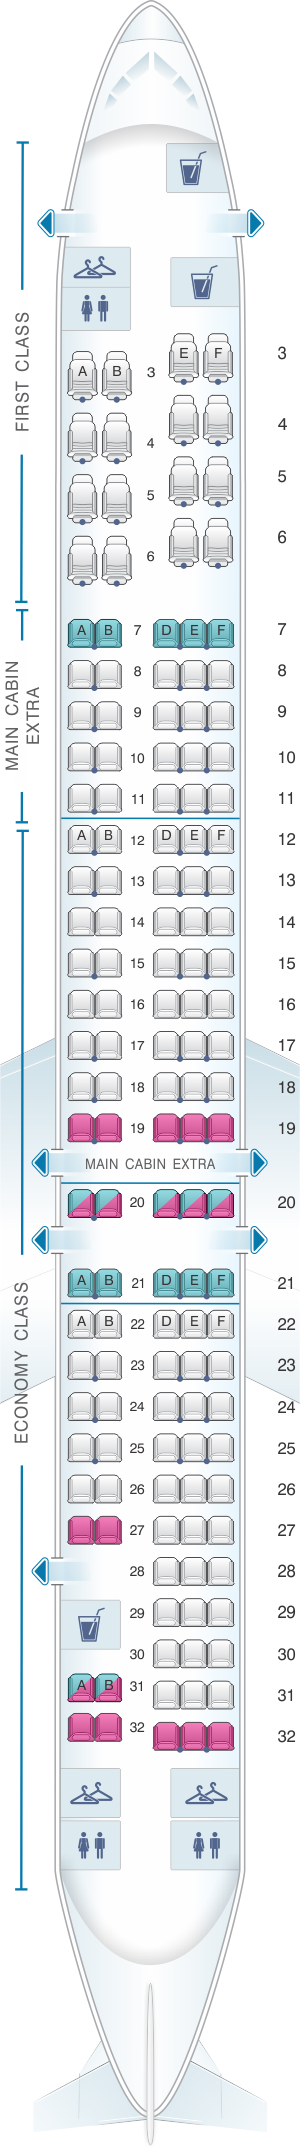 Delta Md 80 Seating Chart